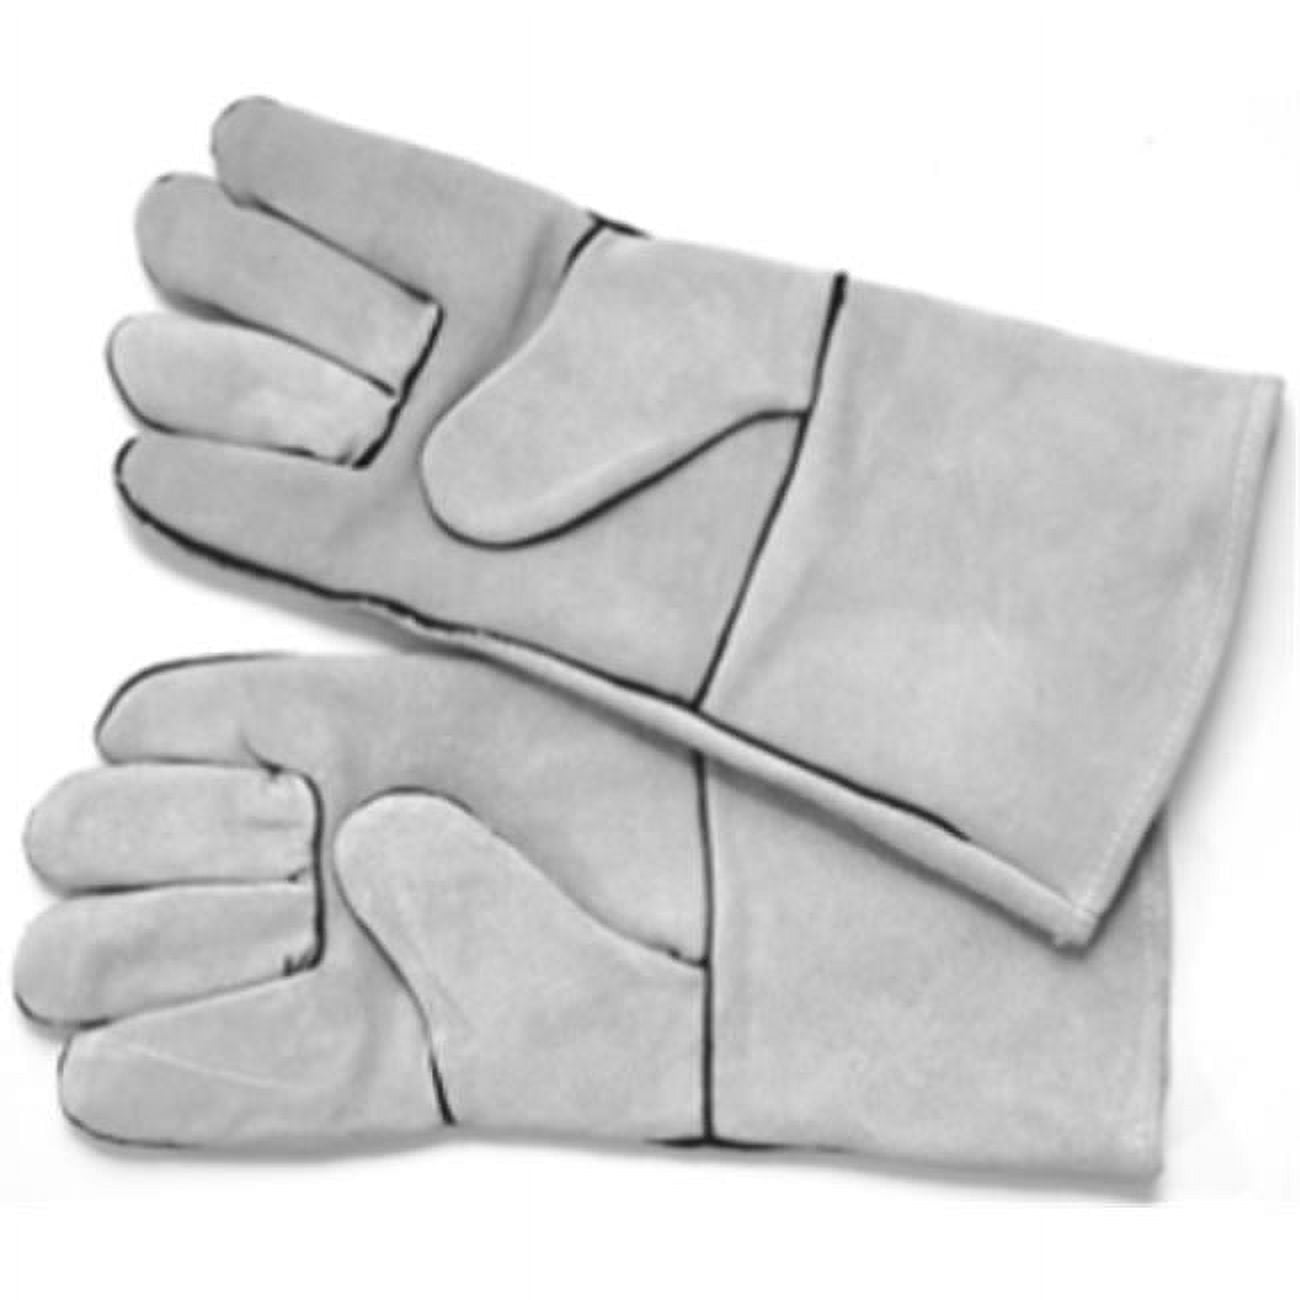 22050 Leather Lined Welding Glove, Gray